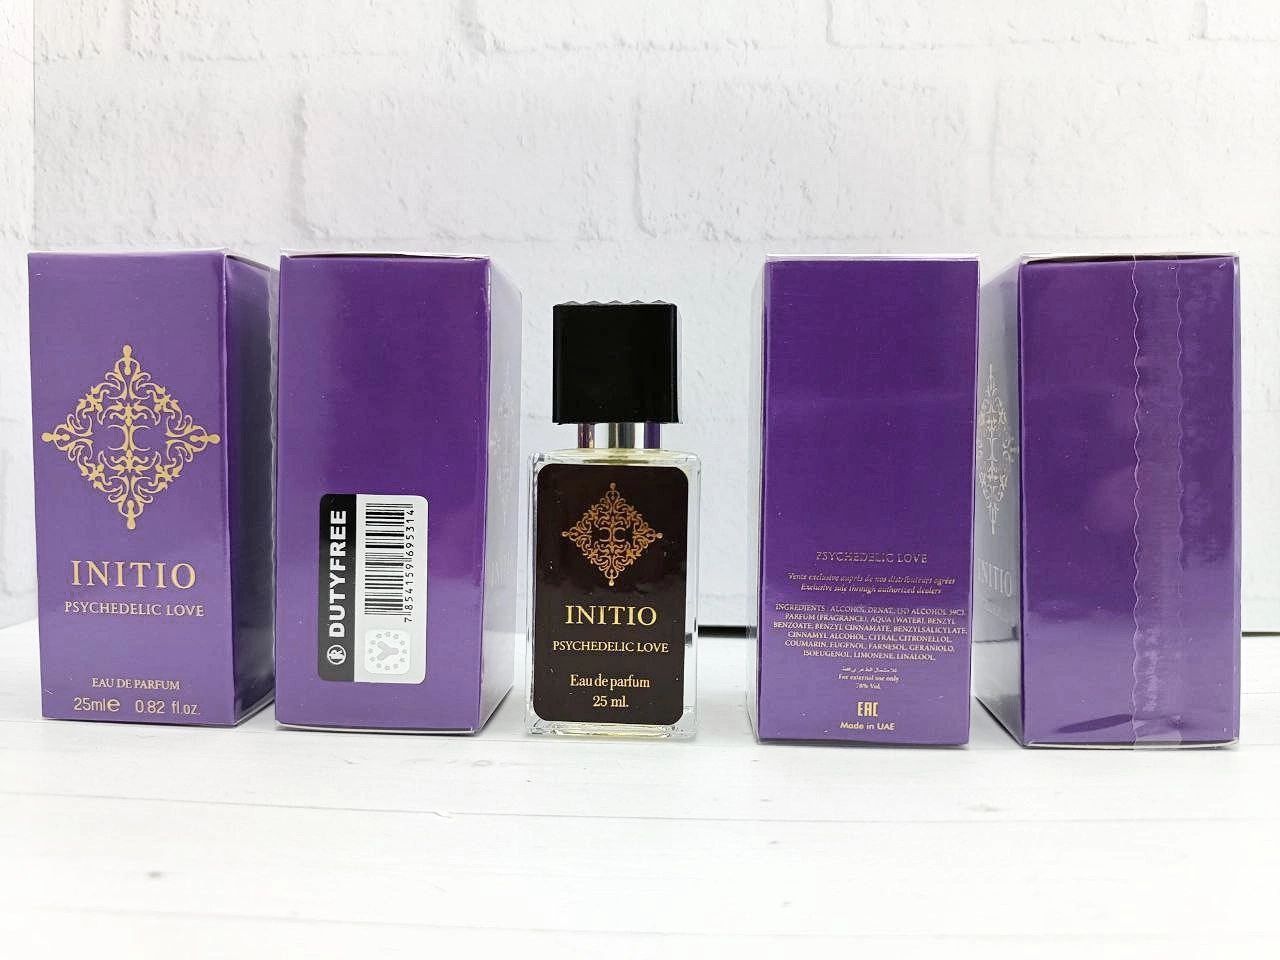 Initio prives psychedelic love. Inito Psychedelic Love 25 мл. Психоделик Парфюм. Инитио психоделик. Psychedelic Love Initio Parfums prives.